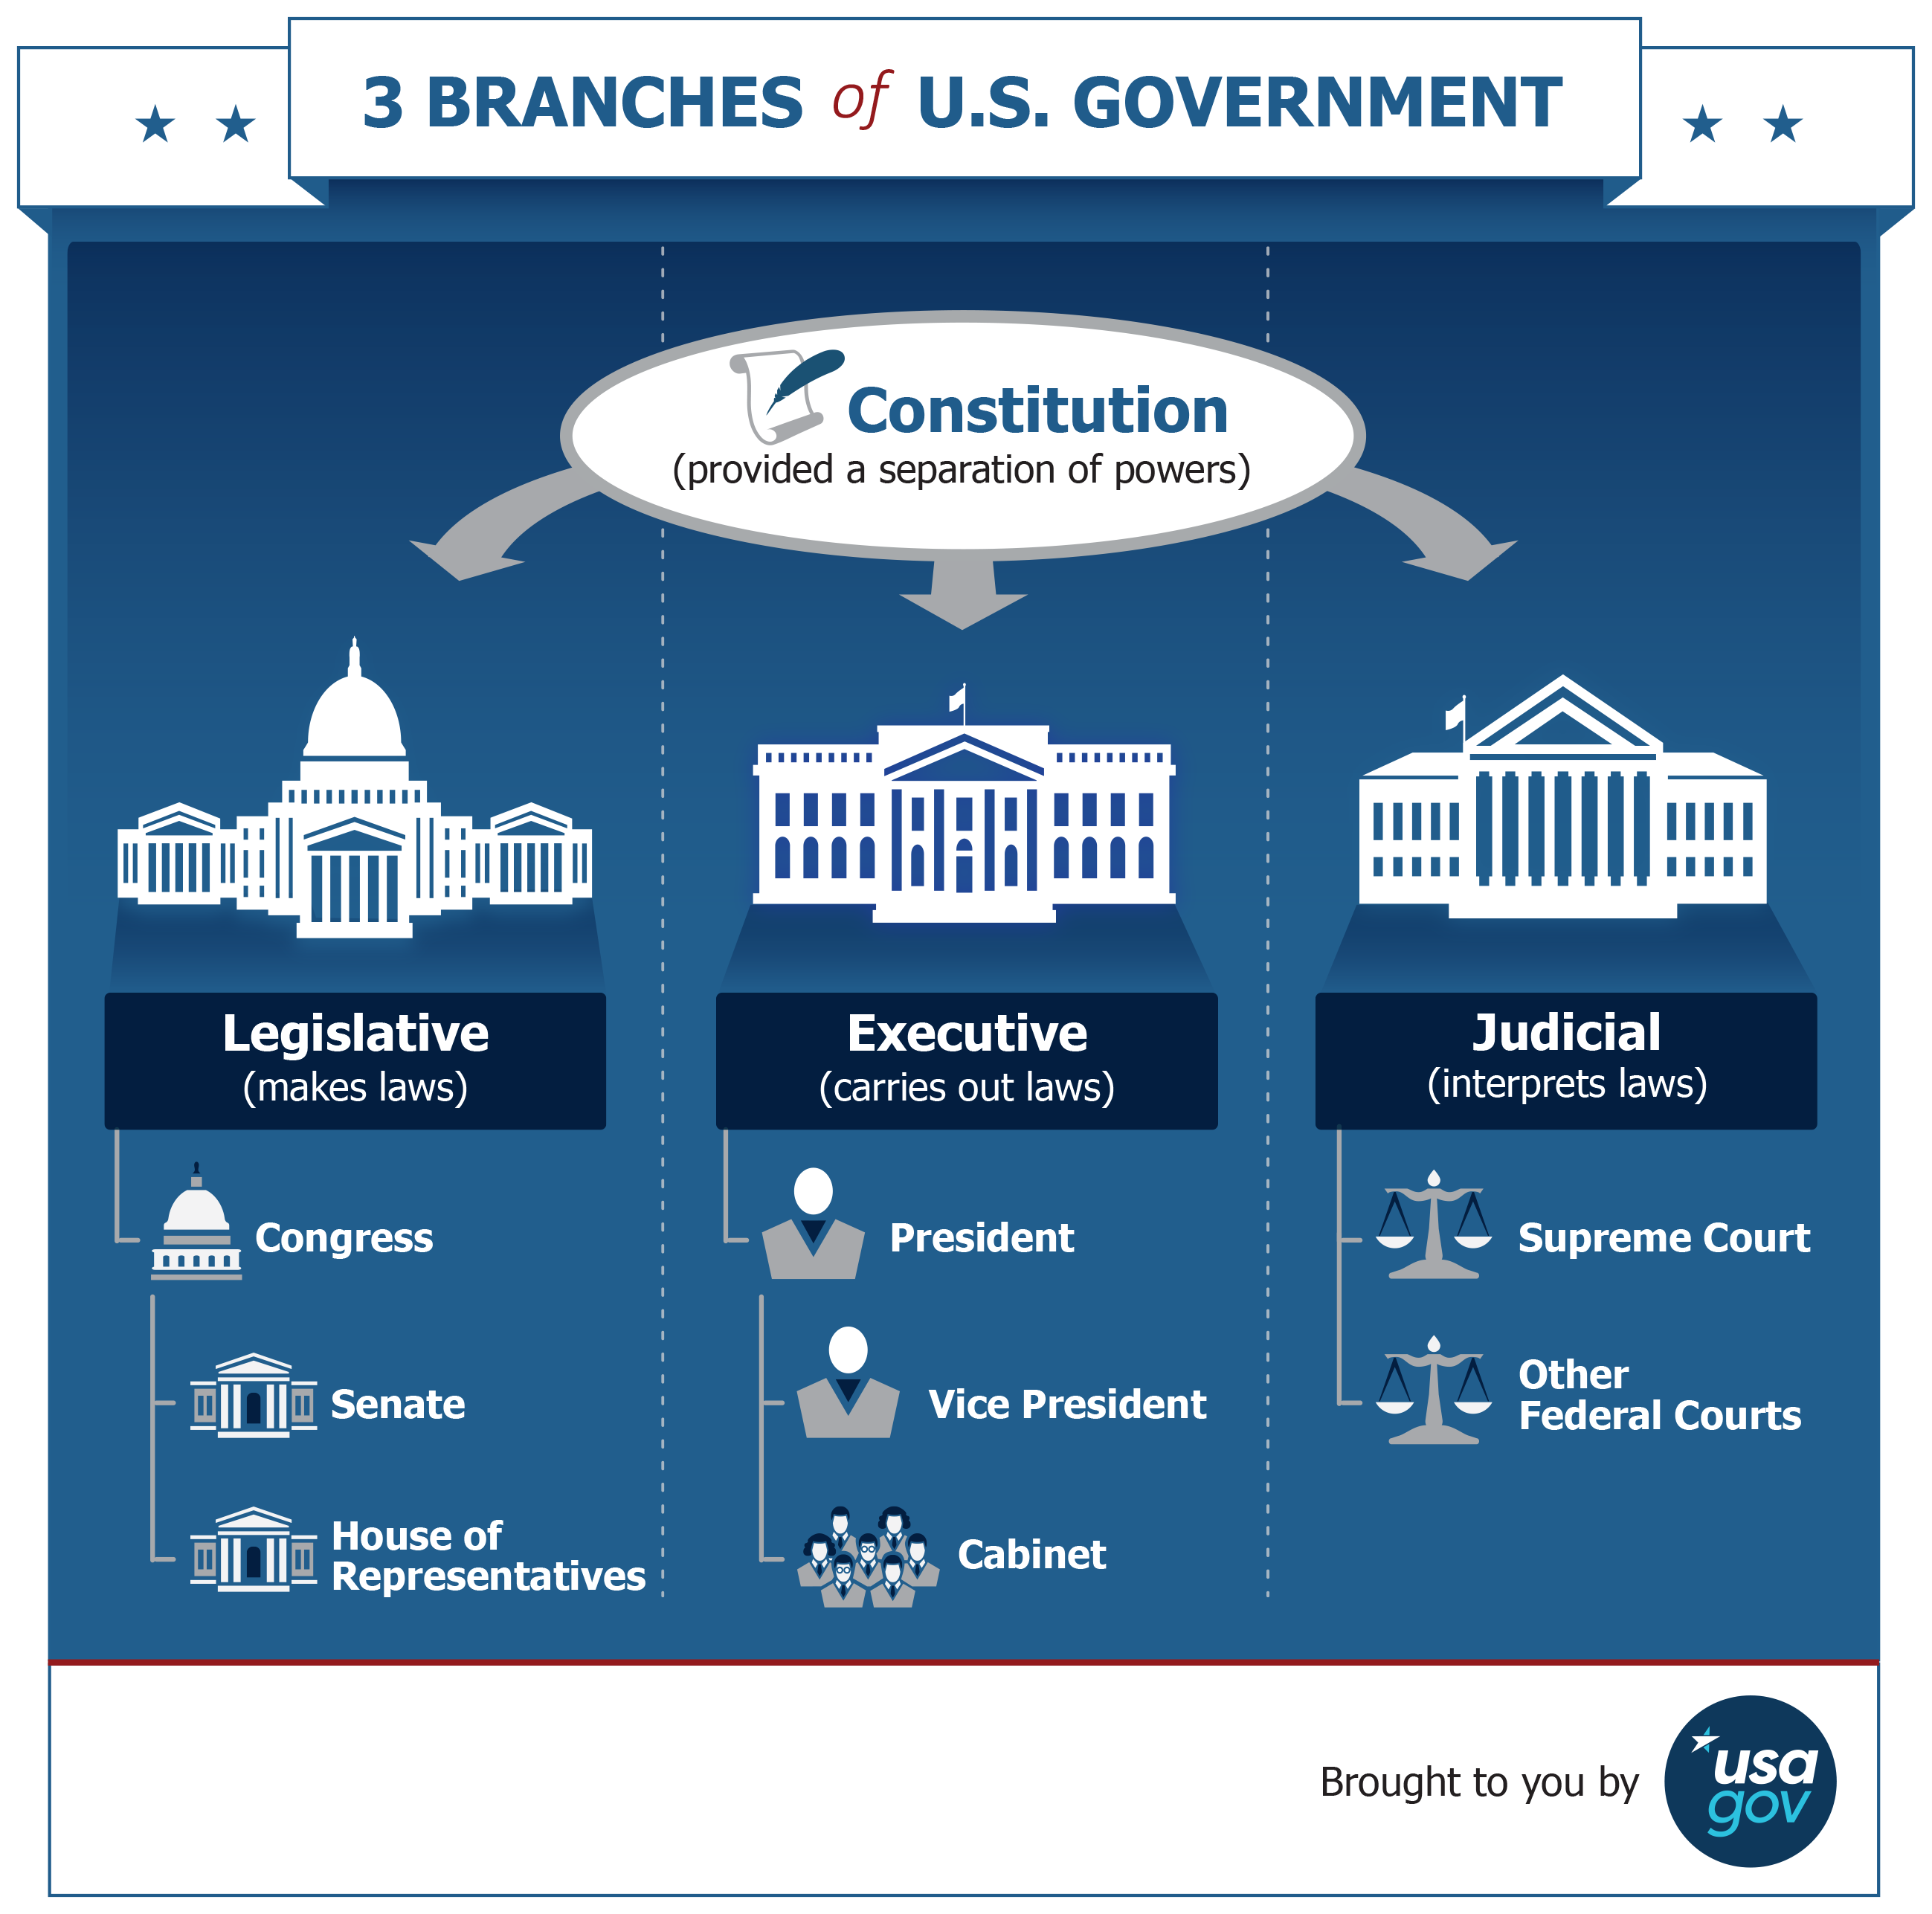 3 Branches of U.S. Government infographic. See description below.